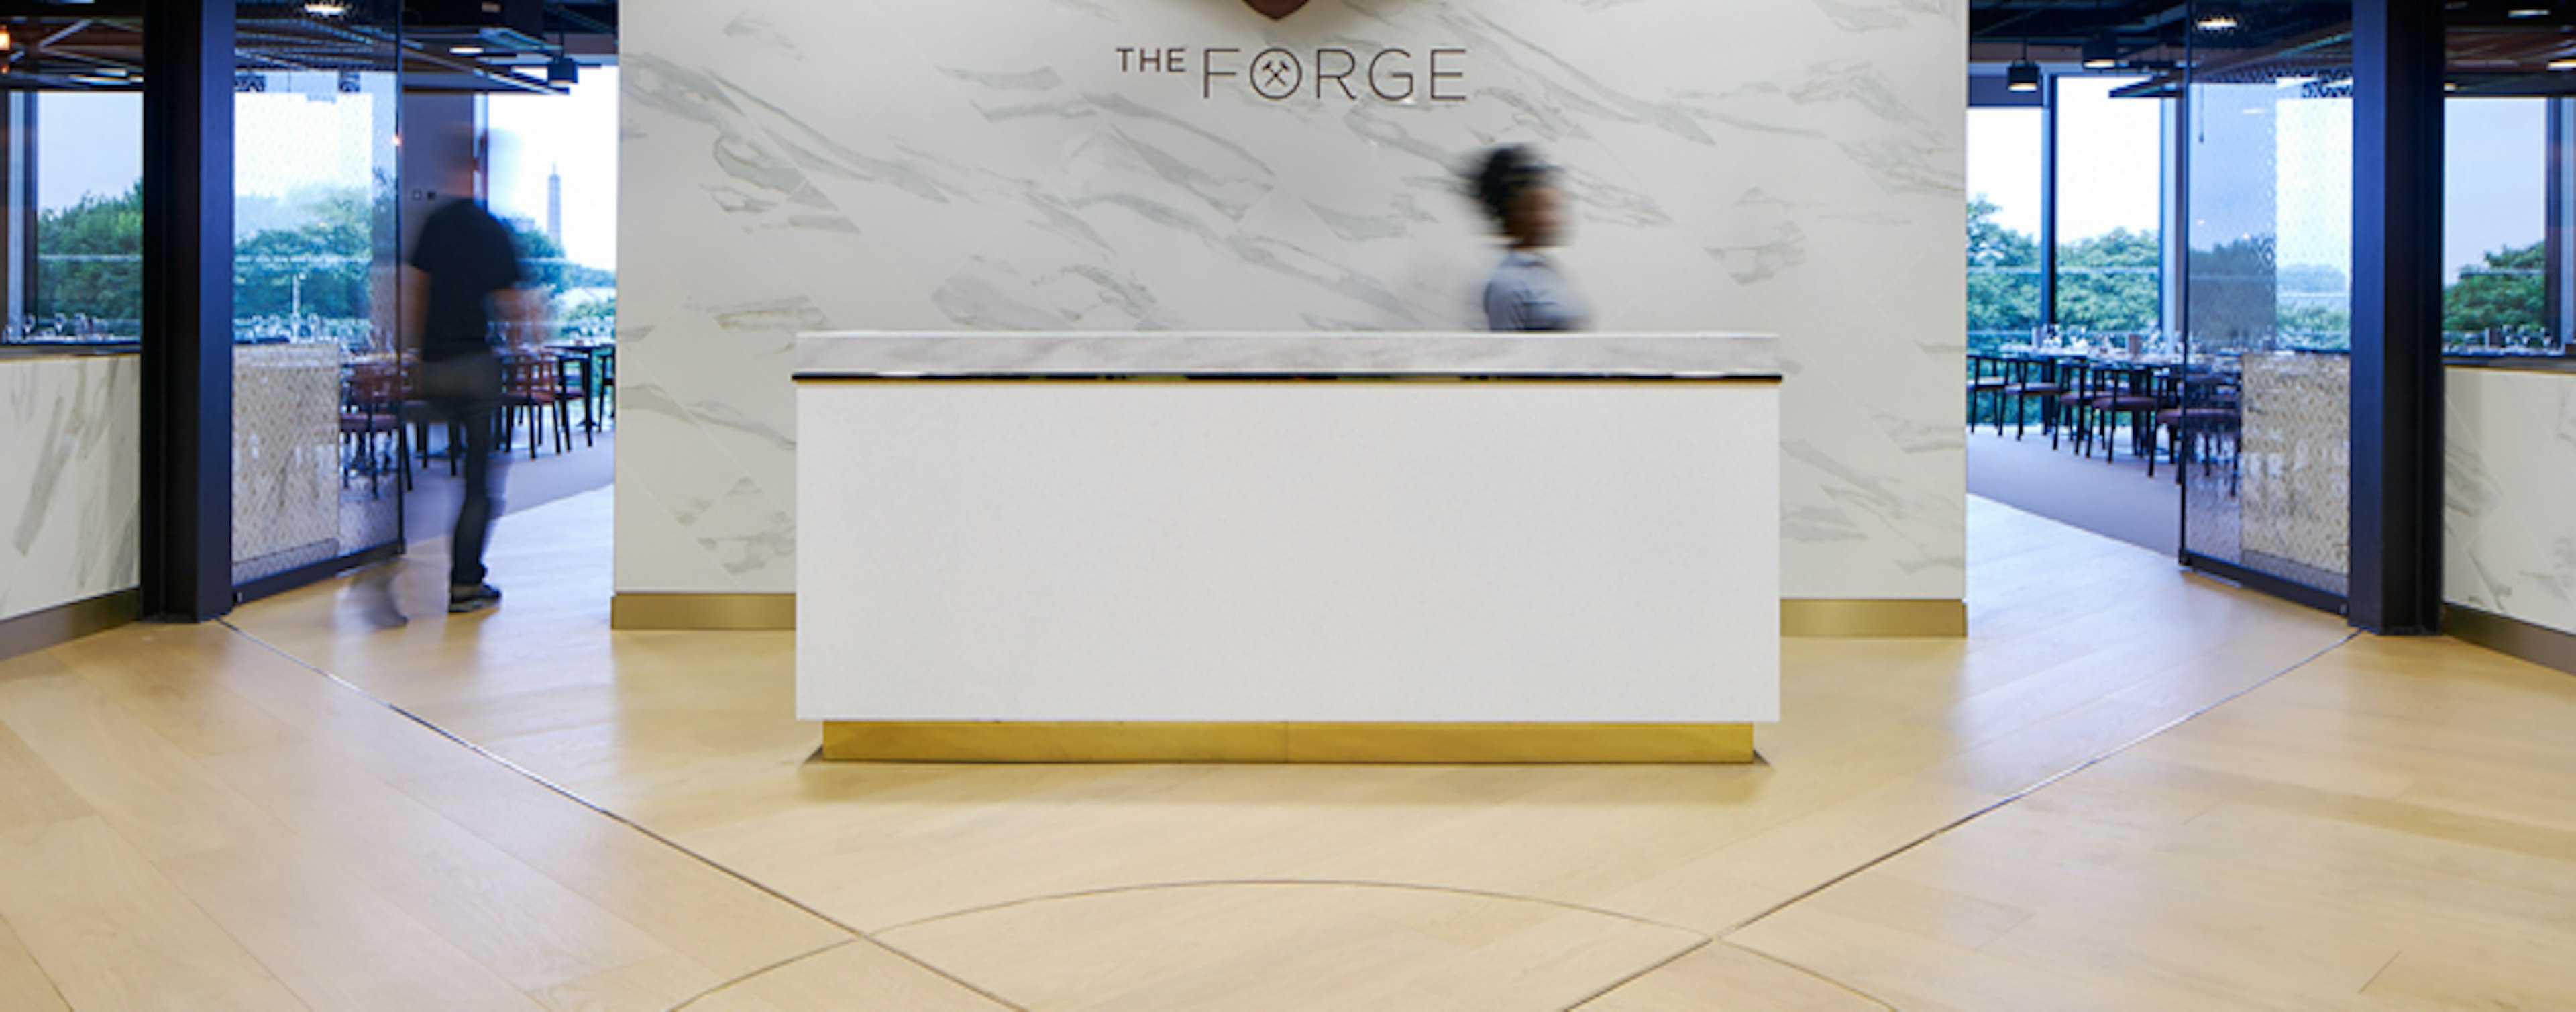 The Forge - image